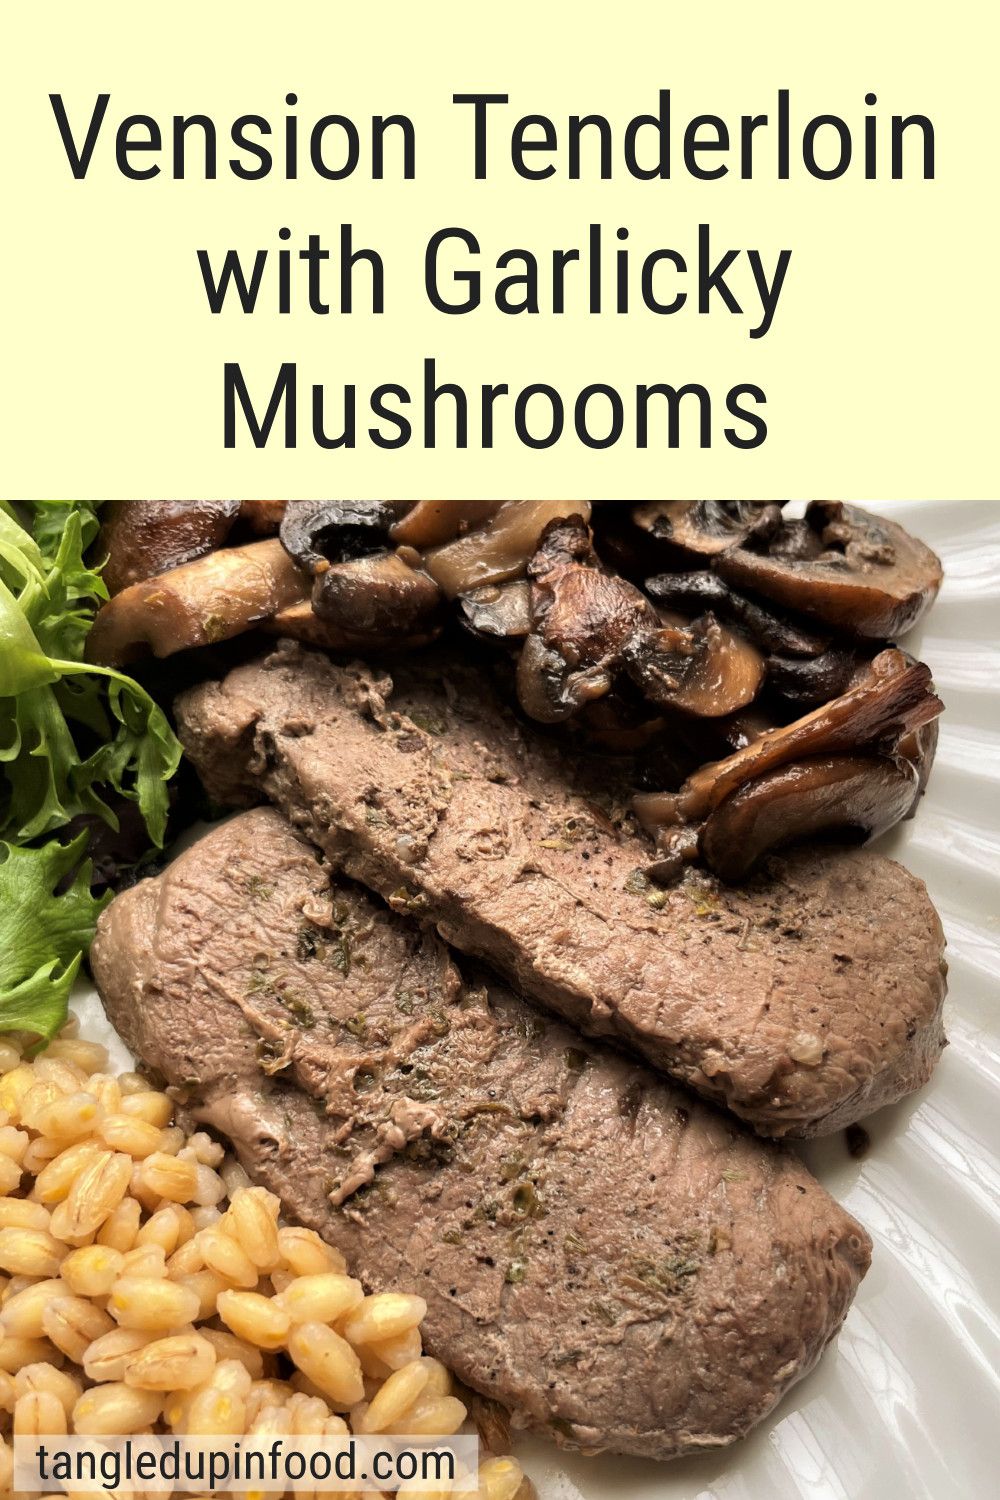 Picture of venison tenderloin and text reading "Venison Tenderloin with Garlicky Mushrooms"